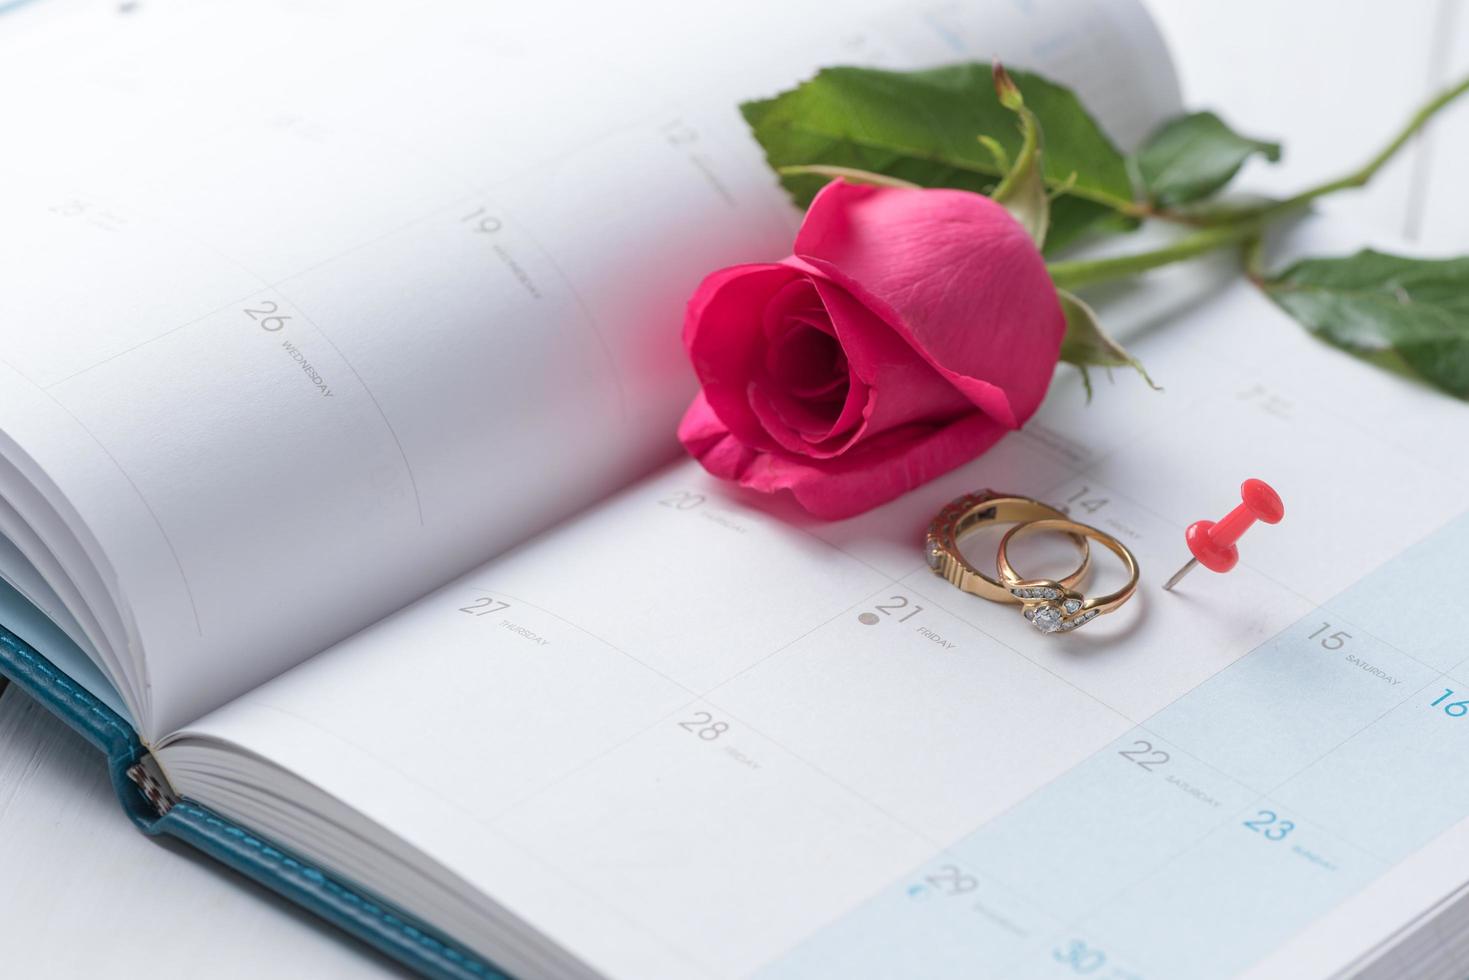 Wedding gold rings and pin on calender. photo